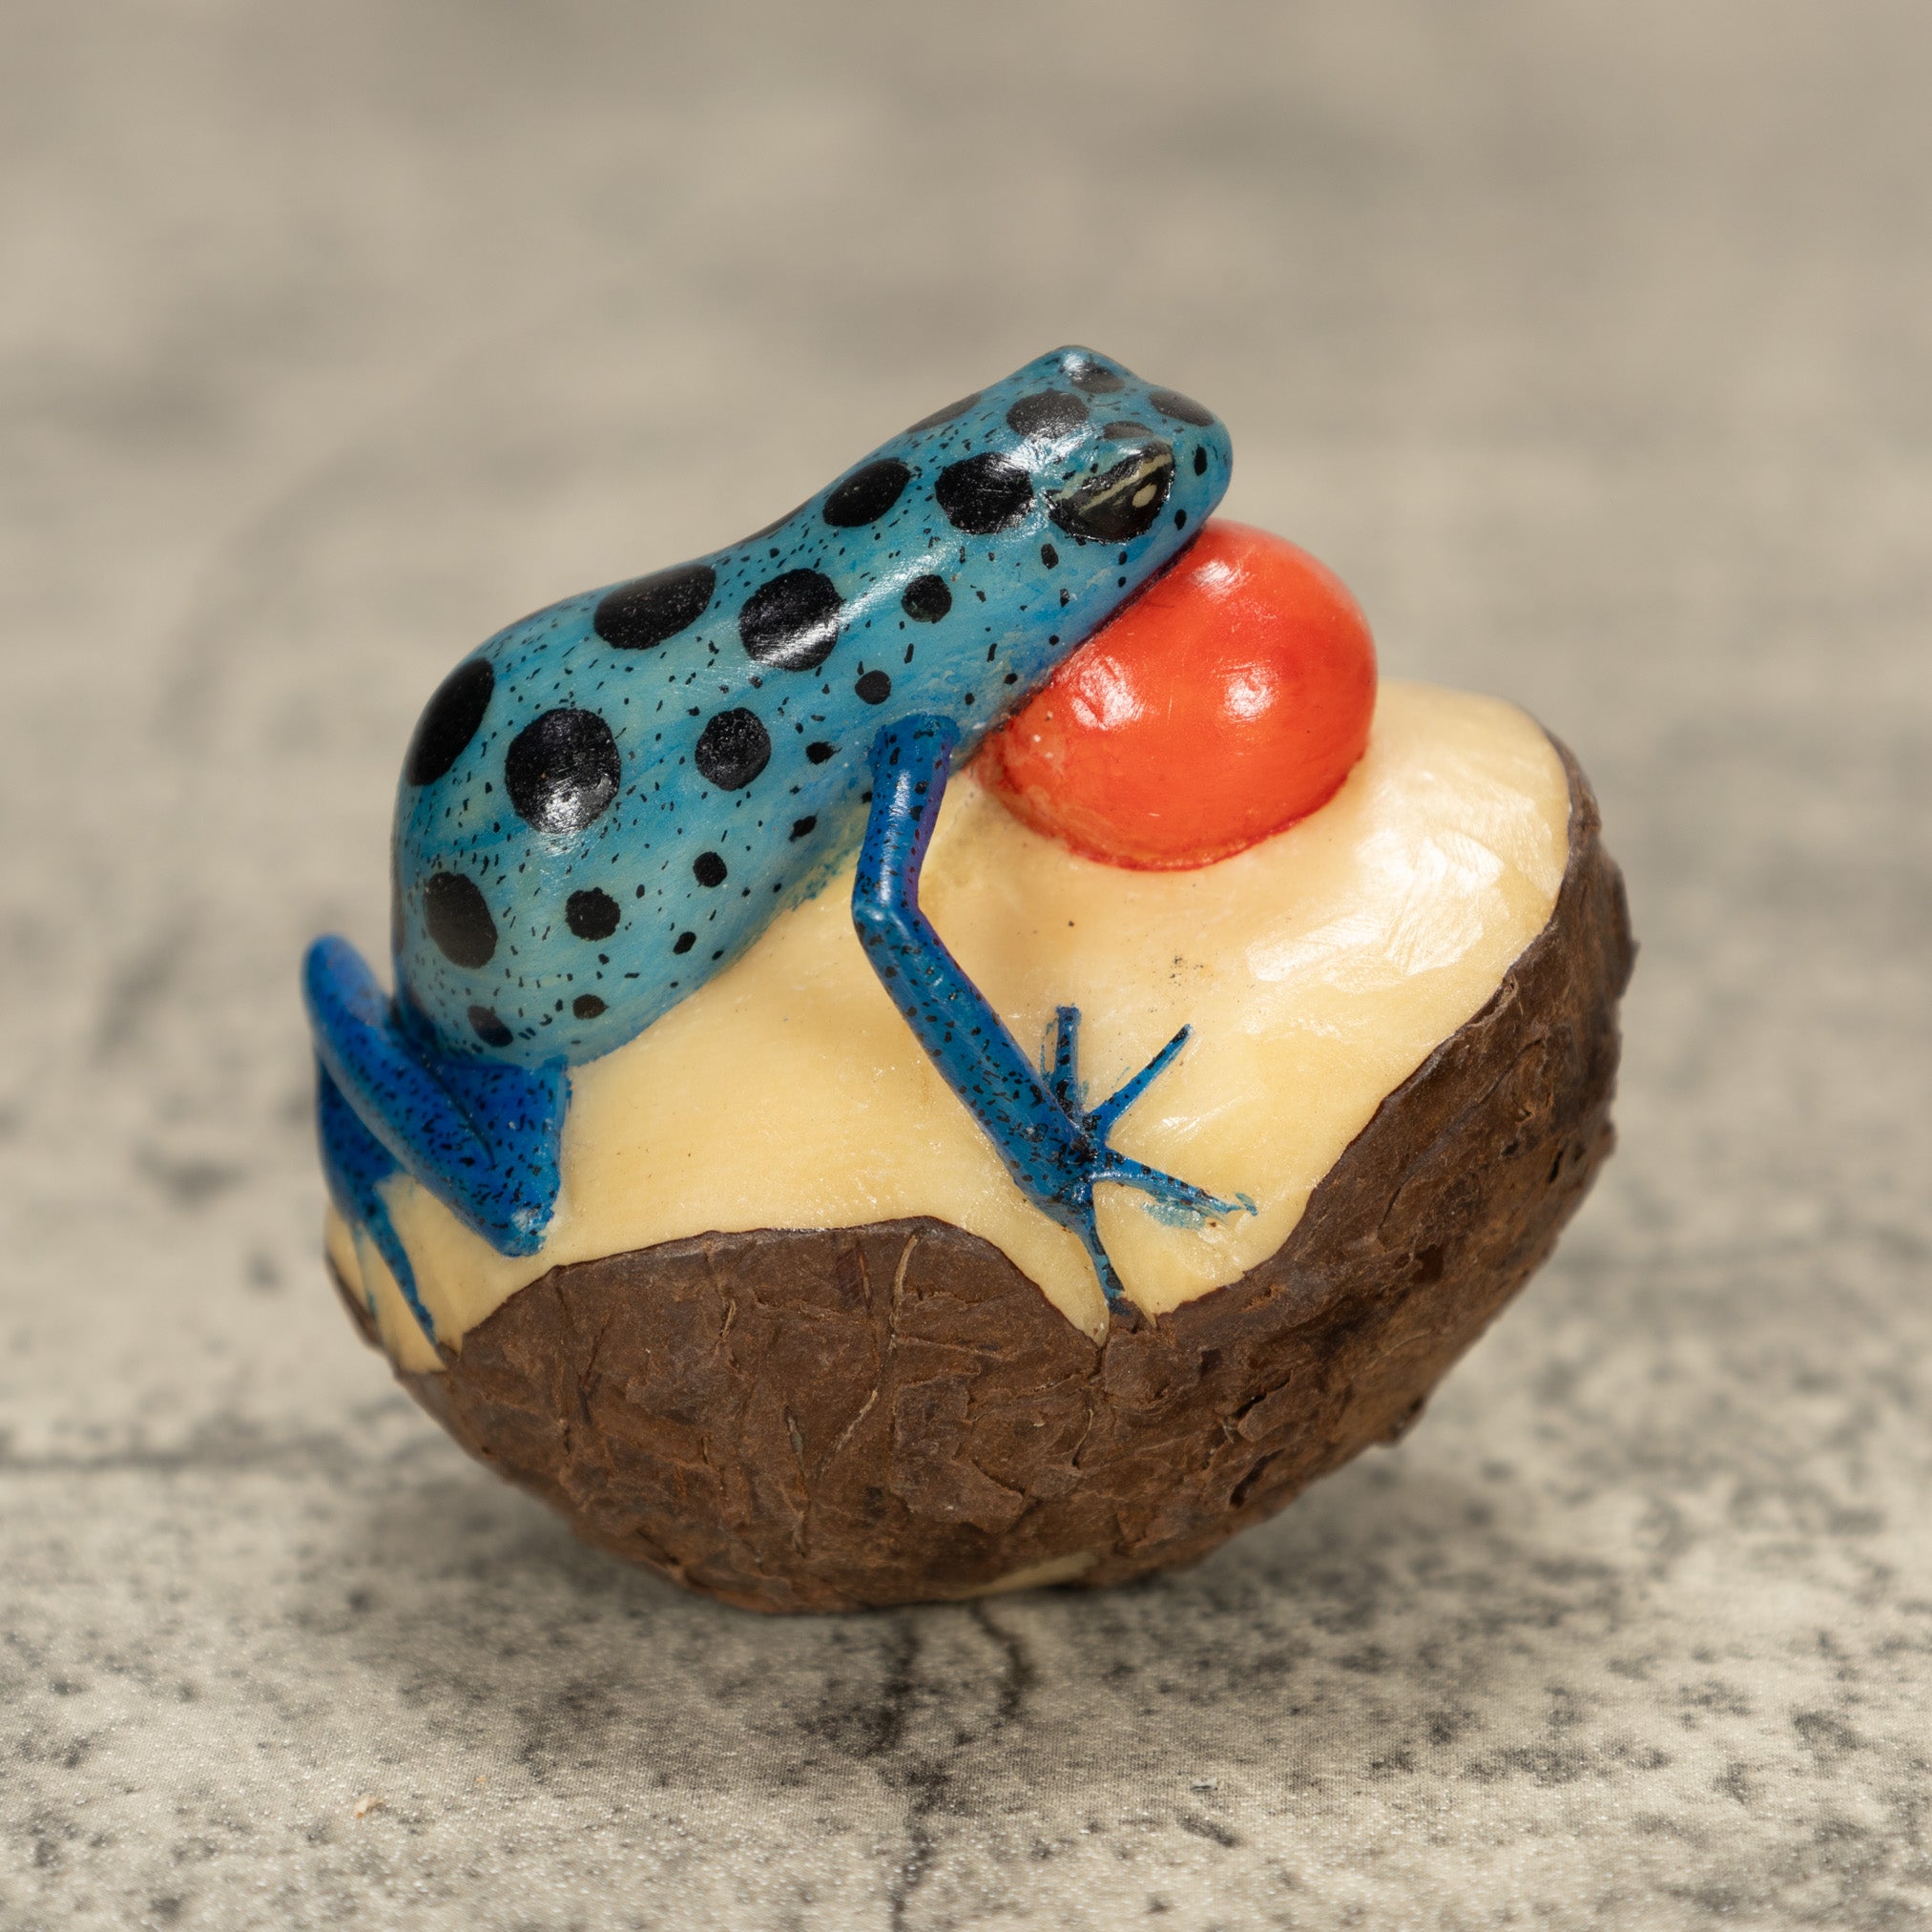 Blowthroat Poison Dart Frog Tagua Nut Carving